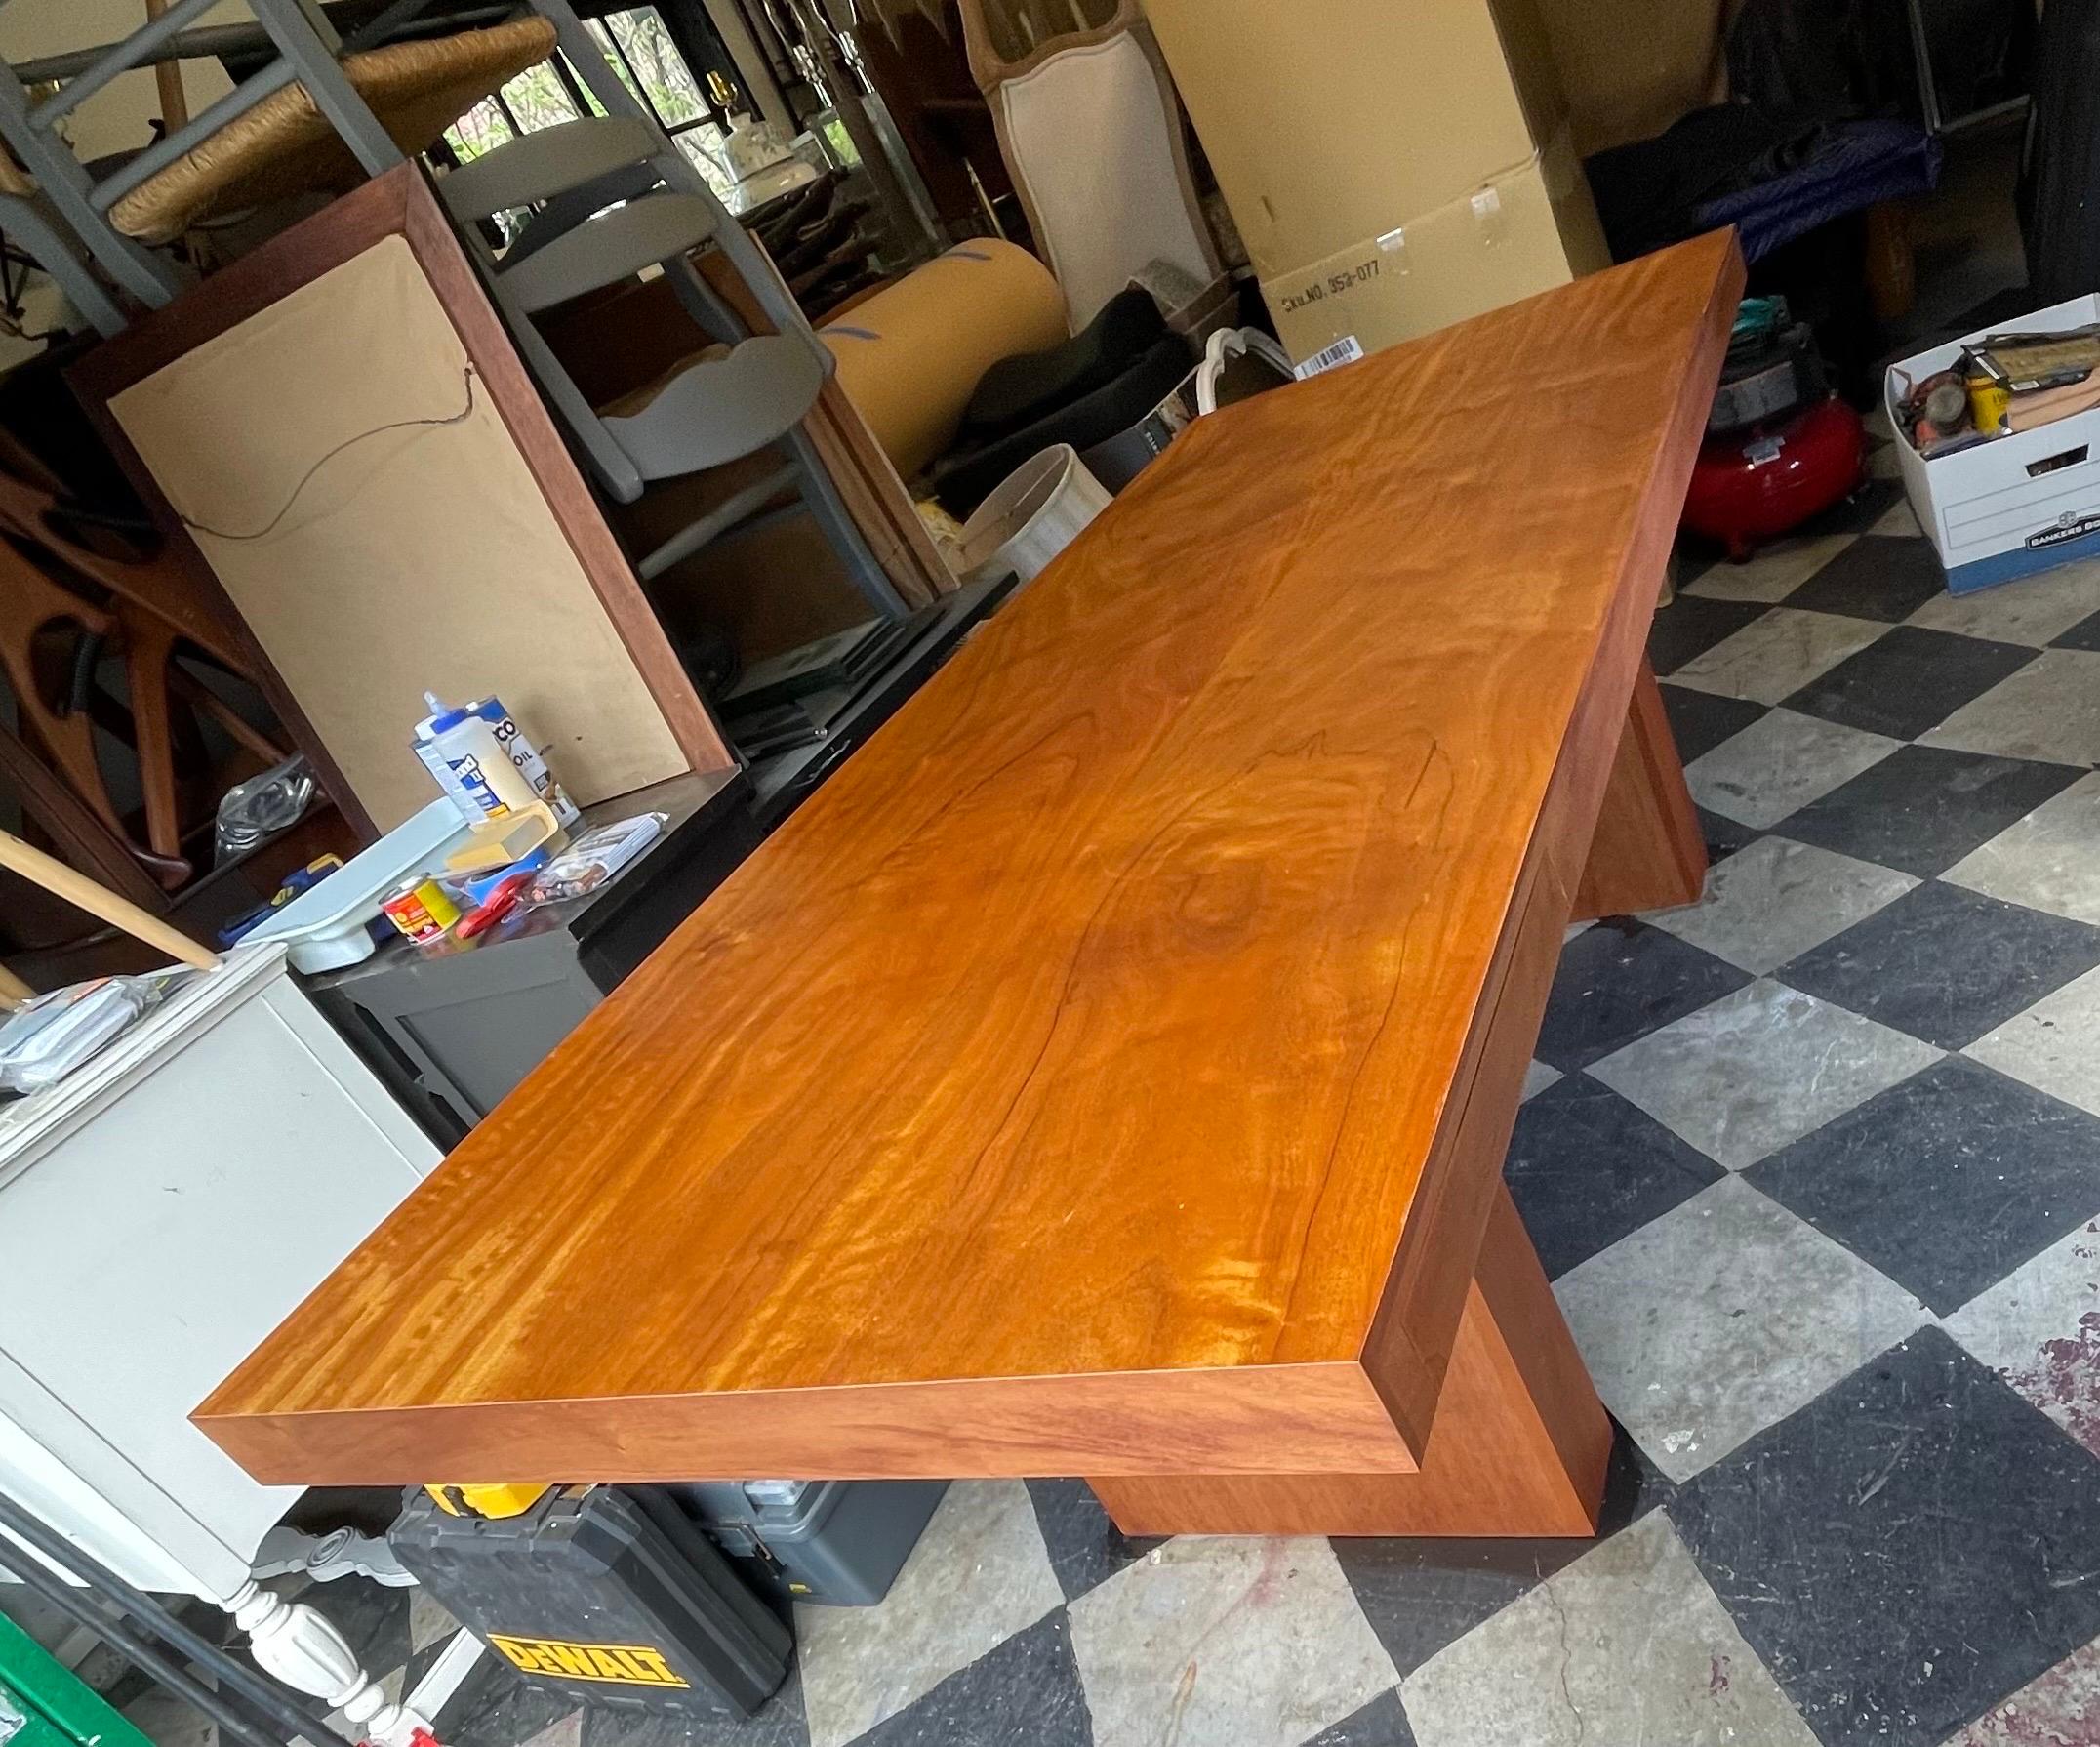 Spectacular Mid Century Parsons Executive desk in Honduran mahogany by Roger Sprunger for Dunbar. Beautifully refinished. Minor repairs at two corners and appear exaggerated in photos, additional photos if requested.